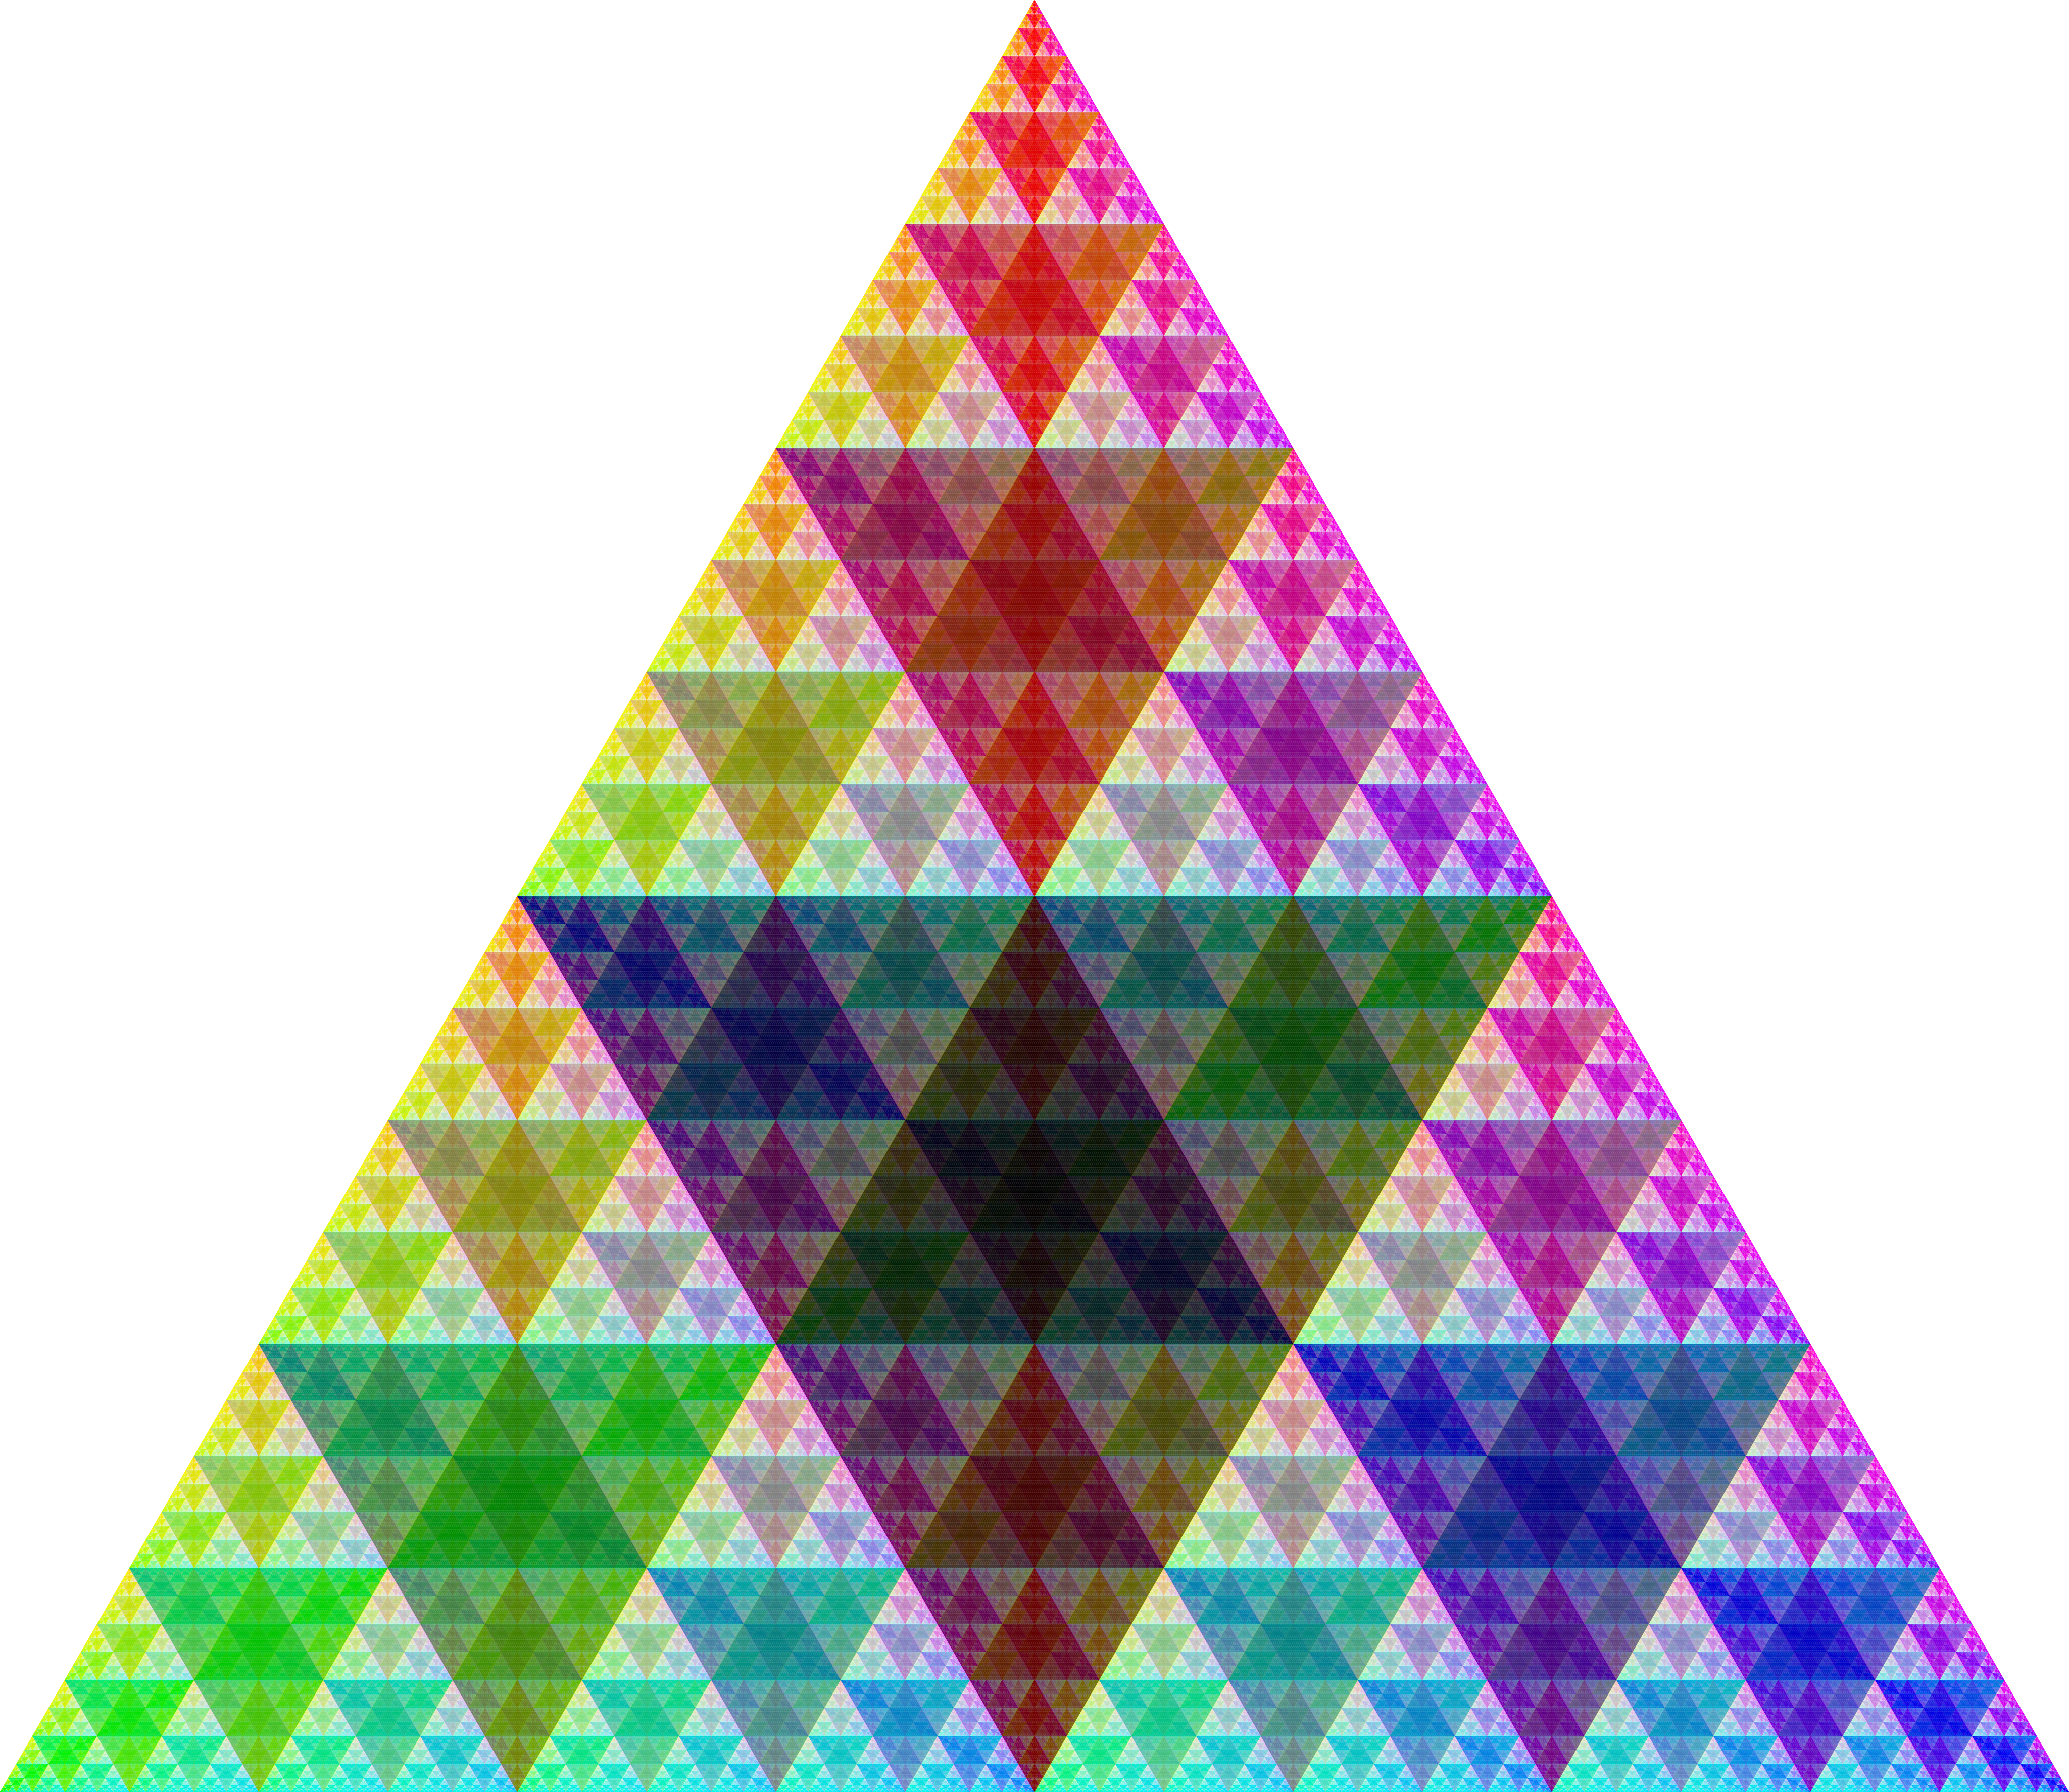 sierpinski with colors